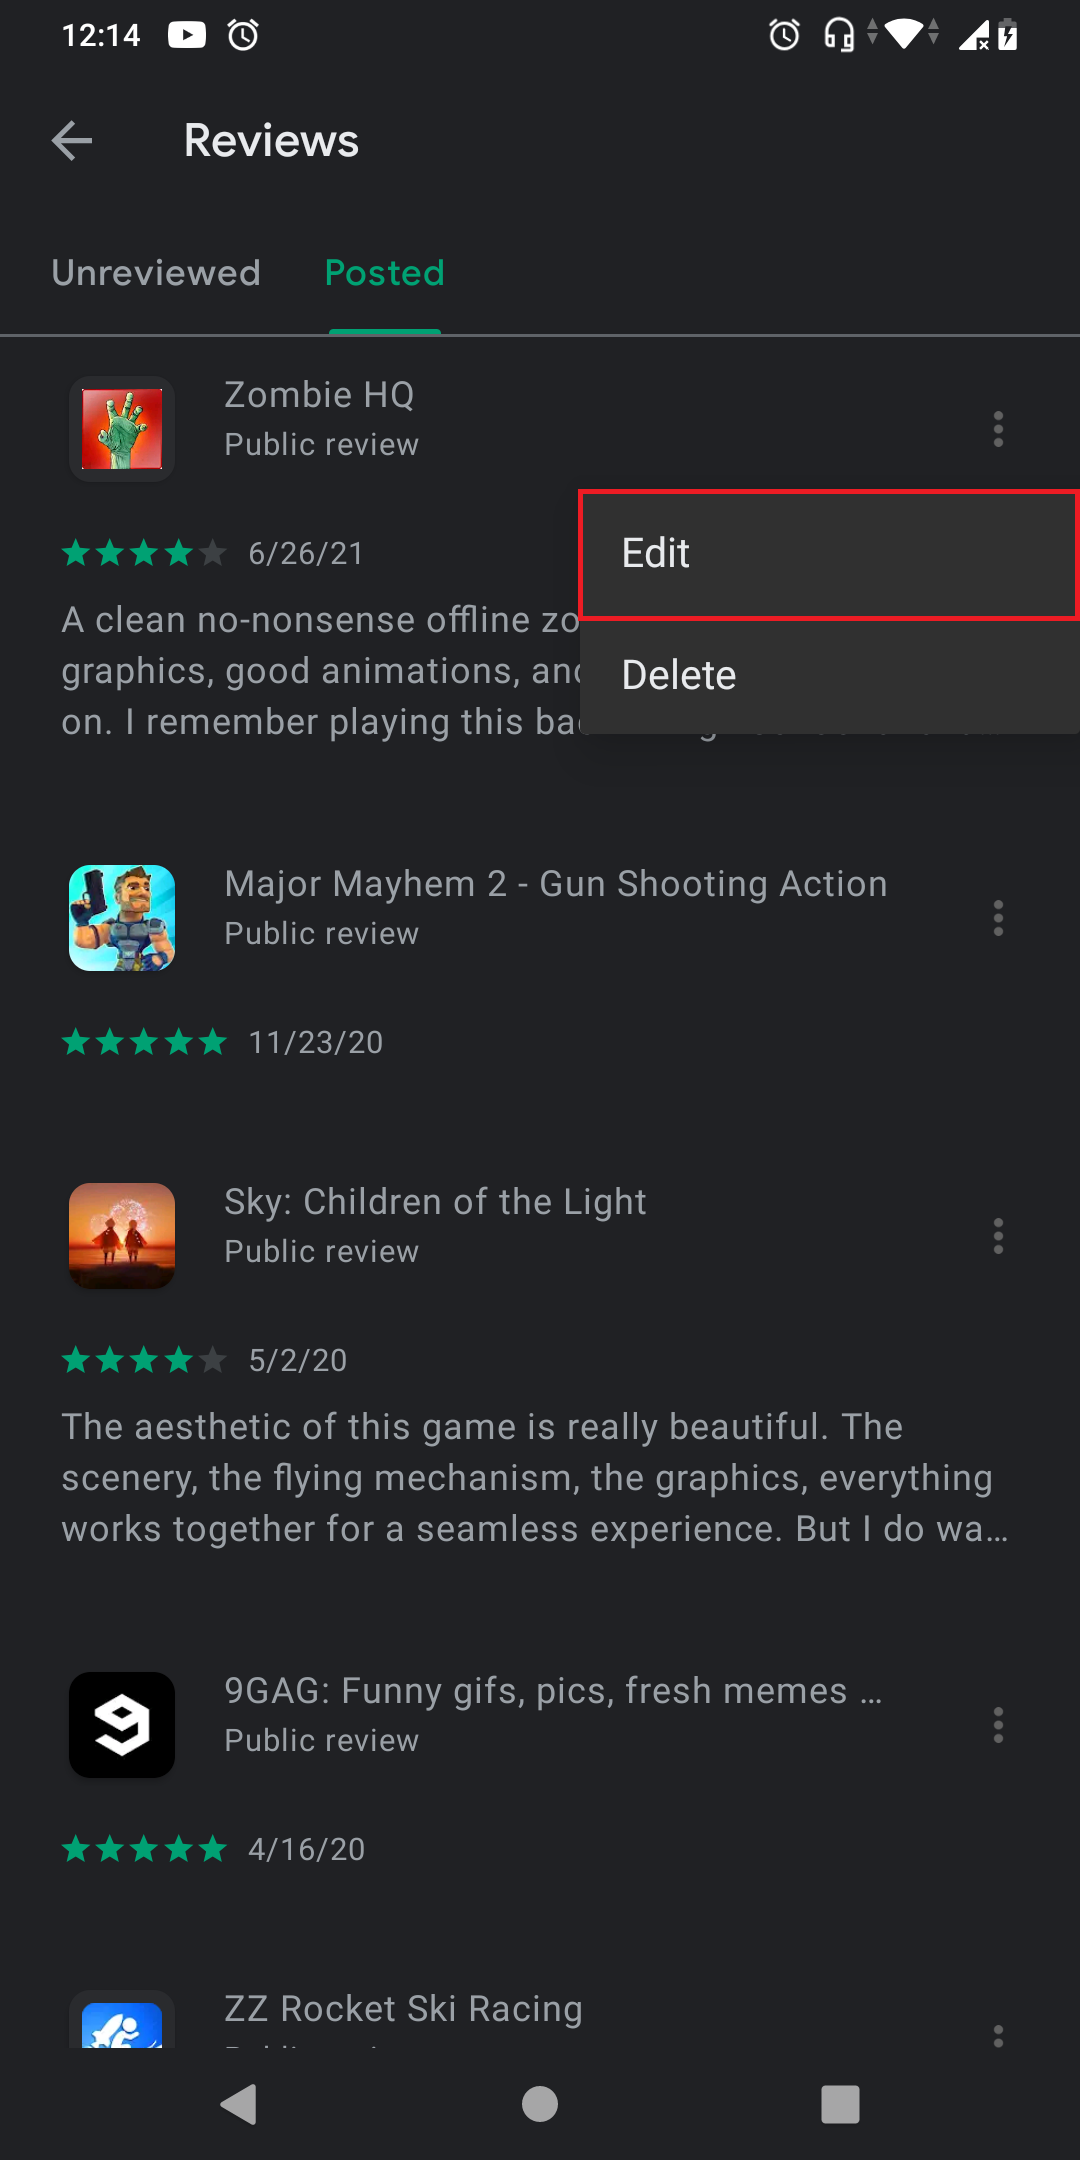 Google-Play-Store-edit-posted-review